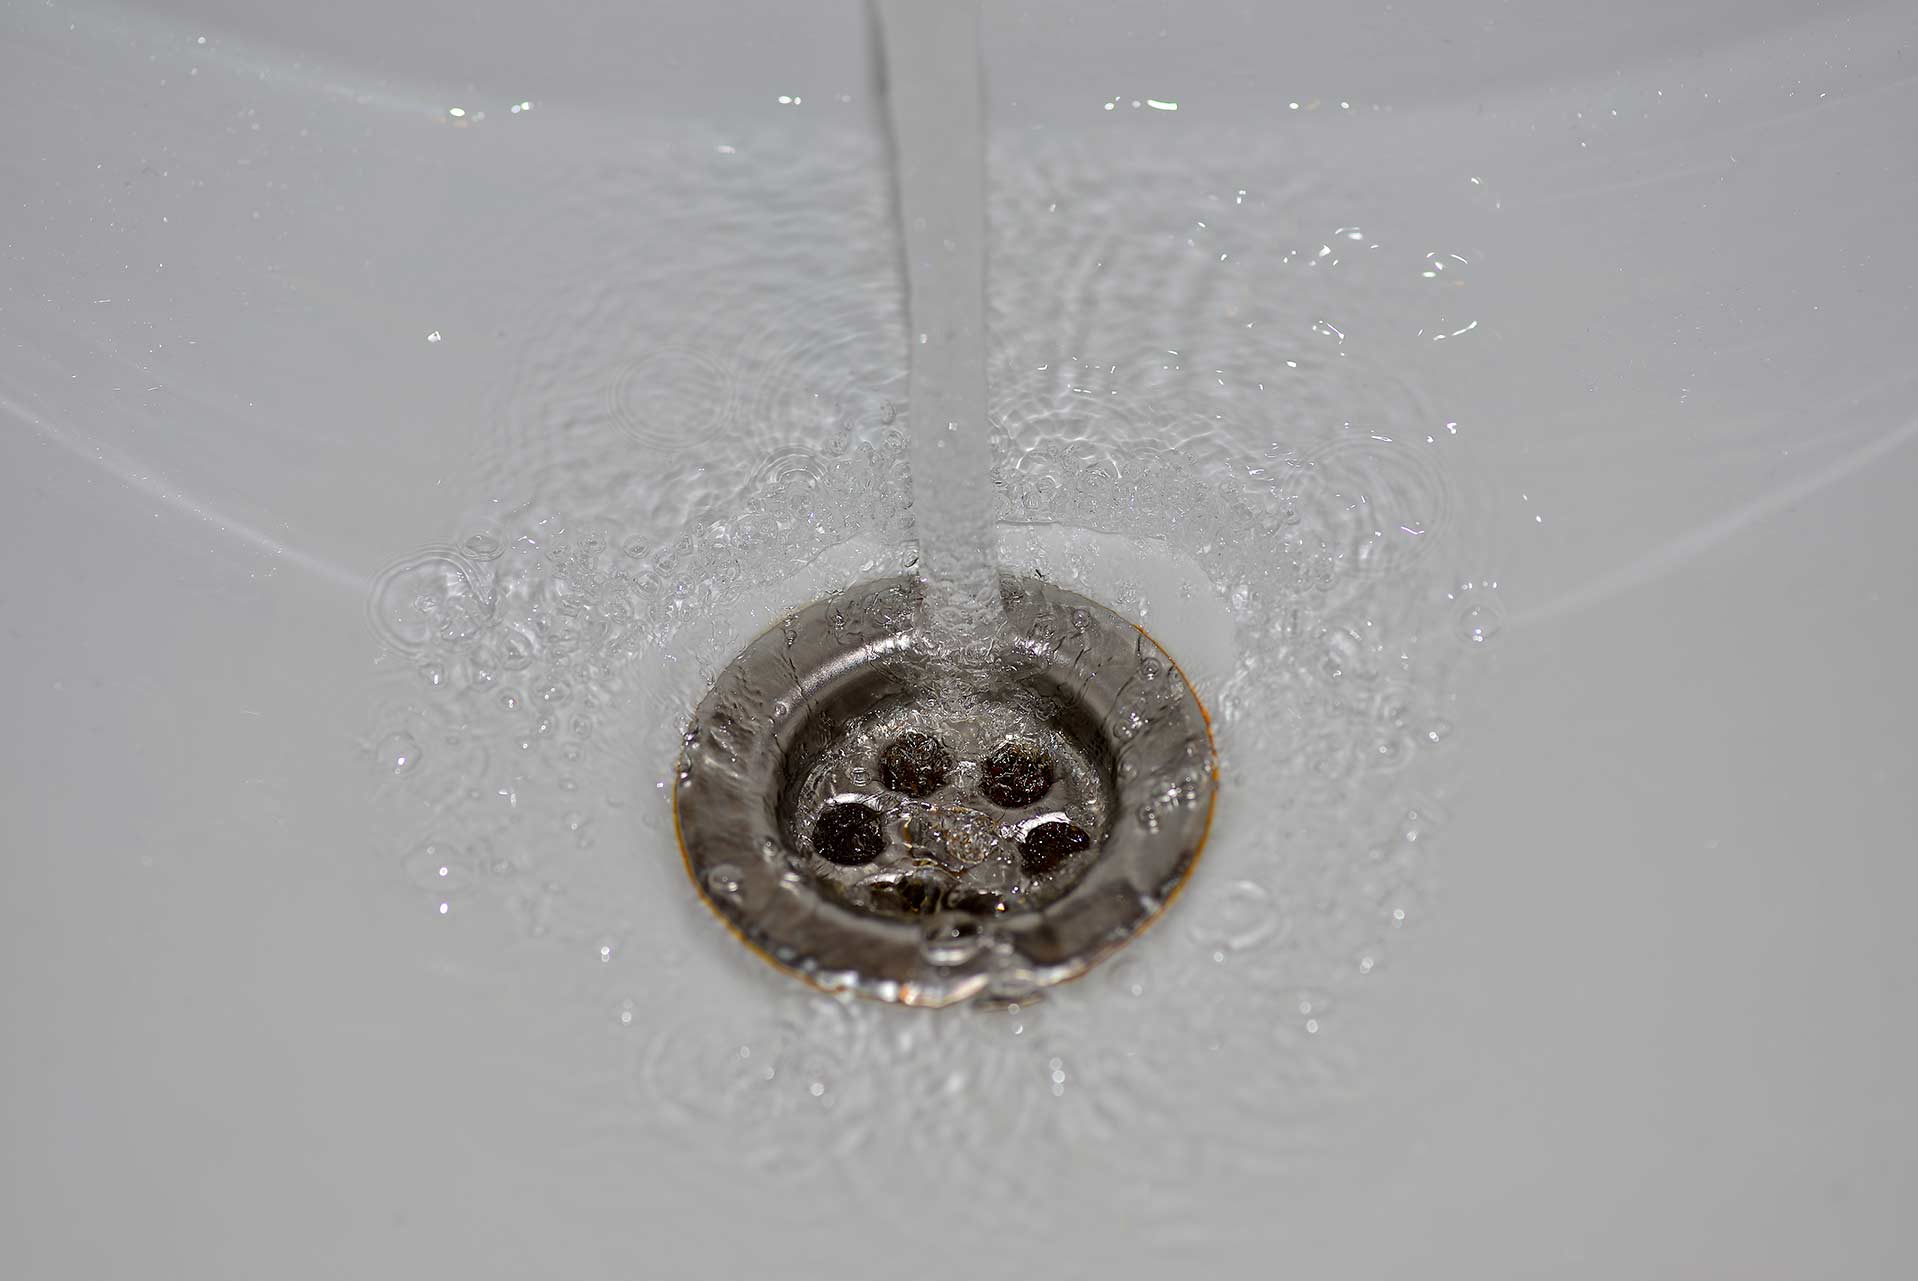 A2B Drains provides services to unblock blocked sinks and drains for properties in Loughborough.